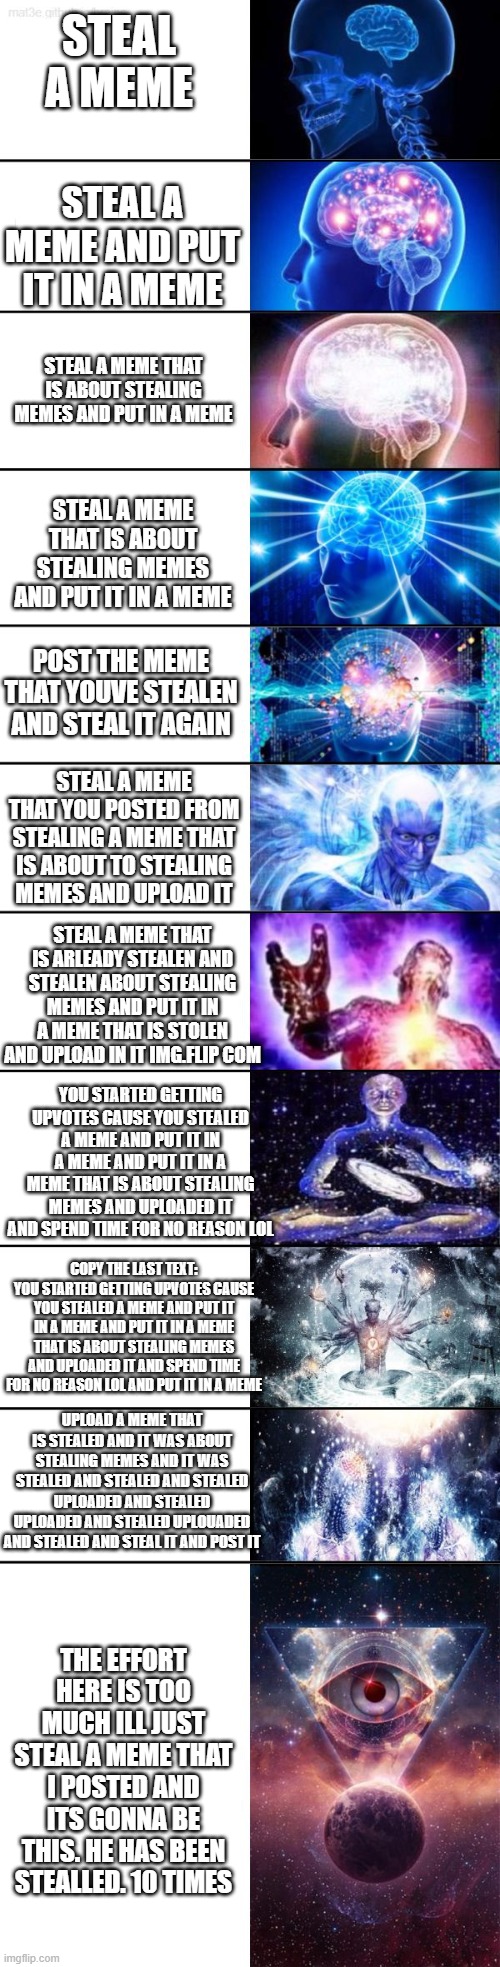 steal a meme | STEAL A MEME; STEAL A MEME AND PUT IT IN A MEME; STEAL A MEME THAT IS ABOUT STEALING MEMES AND PUT IN A MEME; STEAL A MEME THAT IS ABOUT STEALING MEMES AND PUT IT IN A MEME; POST THE MEME THAT YOUVE STEALEN AND STEAL IT AGAIN; STEAL A MEME THAT YOU POSTED FROM STEALING A MEME THAT IS ABOUT TO STEALING MEMES AND UPLOAD IT; STEAL A MEME THAT IS ARLEADY STEALEN AND STEALEN ABOUT STEALING MEMES AND PUT IT IN A MEME THAT IS STOLEN AND UPLOAD IN IT IMG.FLIP COM; YOU STARTED GETTING UPVOTES CAUSE YOU STEALED A MEME AND PUT IT IN A MEME AND PUT IT IN A MEME THAT IS ABOUT STEALING MEMES AND UPLOADED IT AND SPEND TIME FOR NO REASON LOL; COPY THE LAST TEXT: YOU STARTED GETTING UPVOTES CAUSE YOU STEALED A MEME AND PUT IT IN A MEME AND PUT IT IN A MEME THAT IS ABOUT STEALING MEMES AND UPLOADED IT AND SPEND TIME FOR NO REASON LOL AND PUT IT IN A MEME; UPLOAD A MEME THAT IS STEALED AND IT WAS ABOUT STEALING MEMES AND IT WAS STEALED AND STEALED AND STEALED UPLOADED AND STEALED UPLOADED AND STEALED UPLOUADED AND STEALED AND STEAL IT AND POST IT; THE EFFORT HERE IS TOO MUCH ILL JUST STEAL A MEME THAT I POSTED AND ITS GONNA BE THIS. HE HAS BEEN STEALLED. 10 TIMES | image tagged in extended expanding brain | made w/ Imgflip meme maker